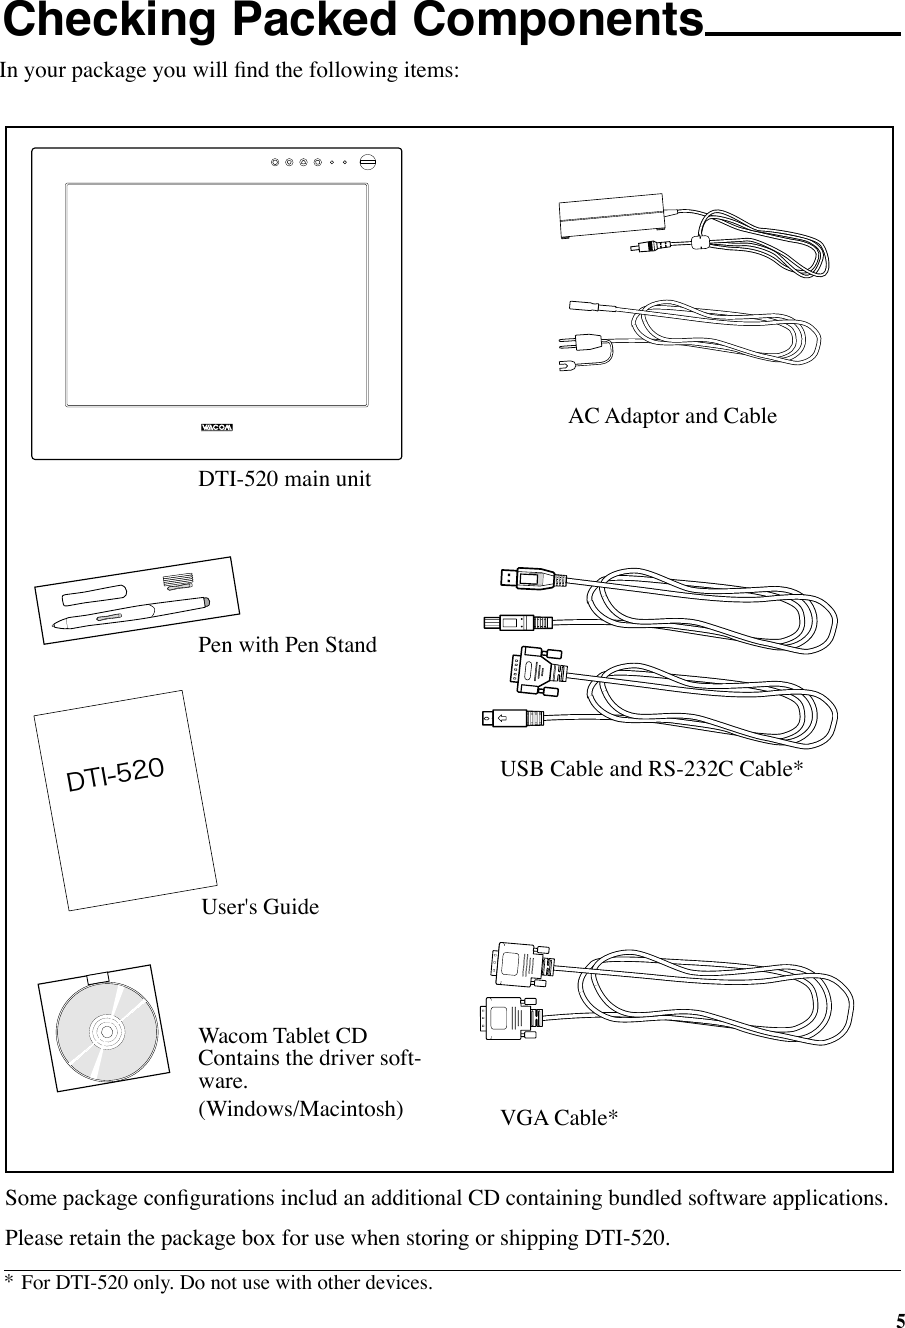 5Checking Packed Components In your package you will ﬁnd the following items: DTI-520USB Cable and RS-232C Cable*VGA Cable*DTI-520 main unitPen with Pen StandUser&apos;s GuideWacom Tablet CDContains the driver soft-ware.(Windows/Macintosh)AC Adaptor and Cable*     For DTI-520 only. Do not use with other devices.Please retain the package box for use when storing or shipping DTI-520.Some package conﬁgurations includ an additional CD containing bundled software applications.